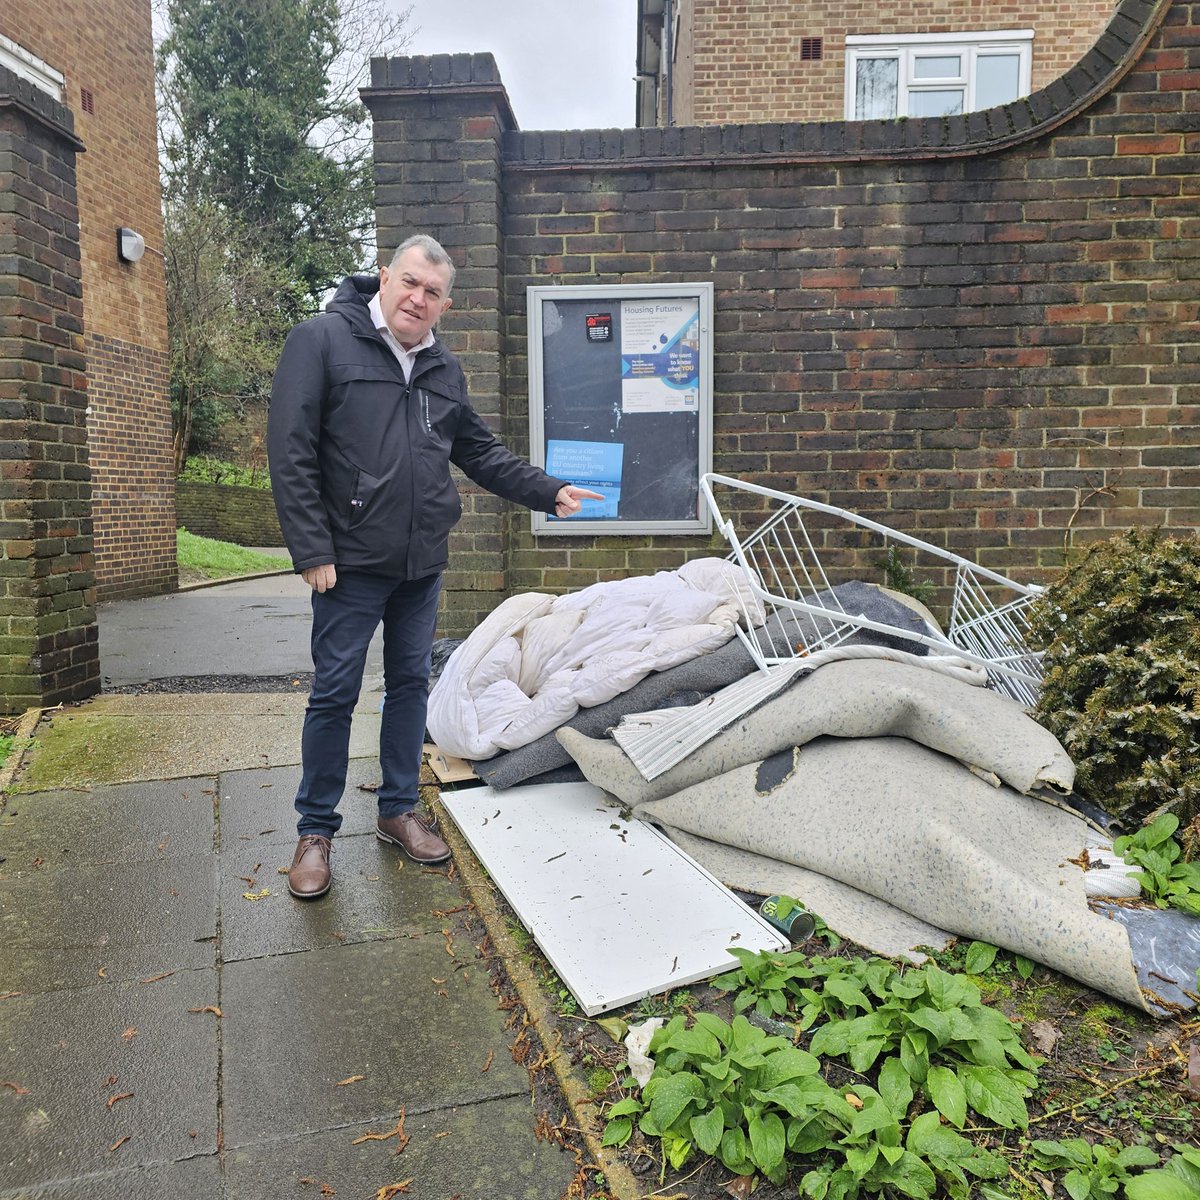 It's not just external areas of Lewisham estates that are a mess. Today's official report says, 'a significant proportion of Lewisham’s homes do not meet the Decent Homes Standard,' it also found that Lewisham did not assess the severity of damp and mould cases properly.